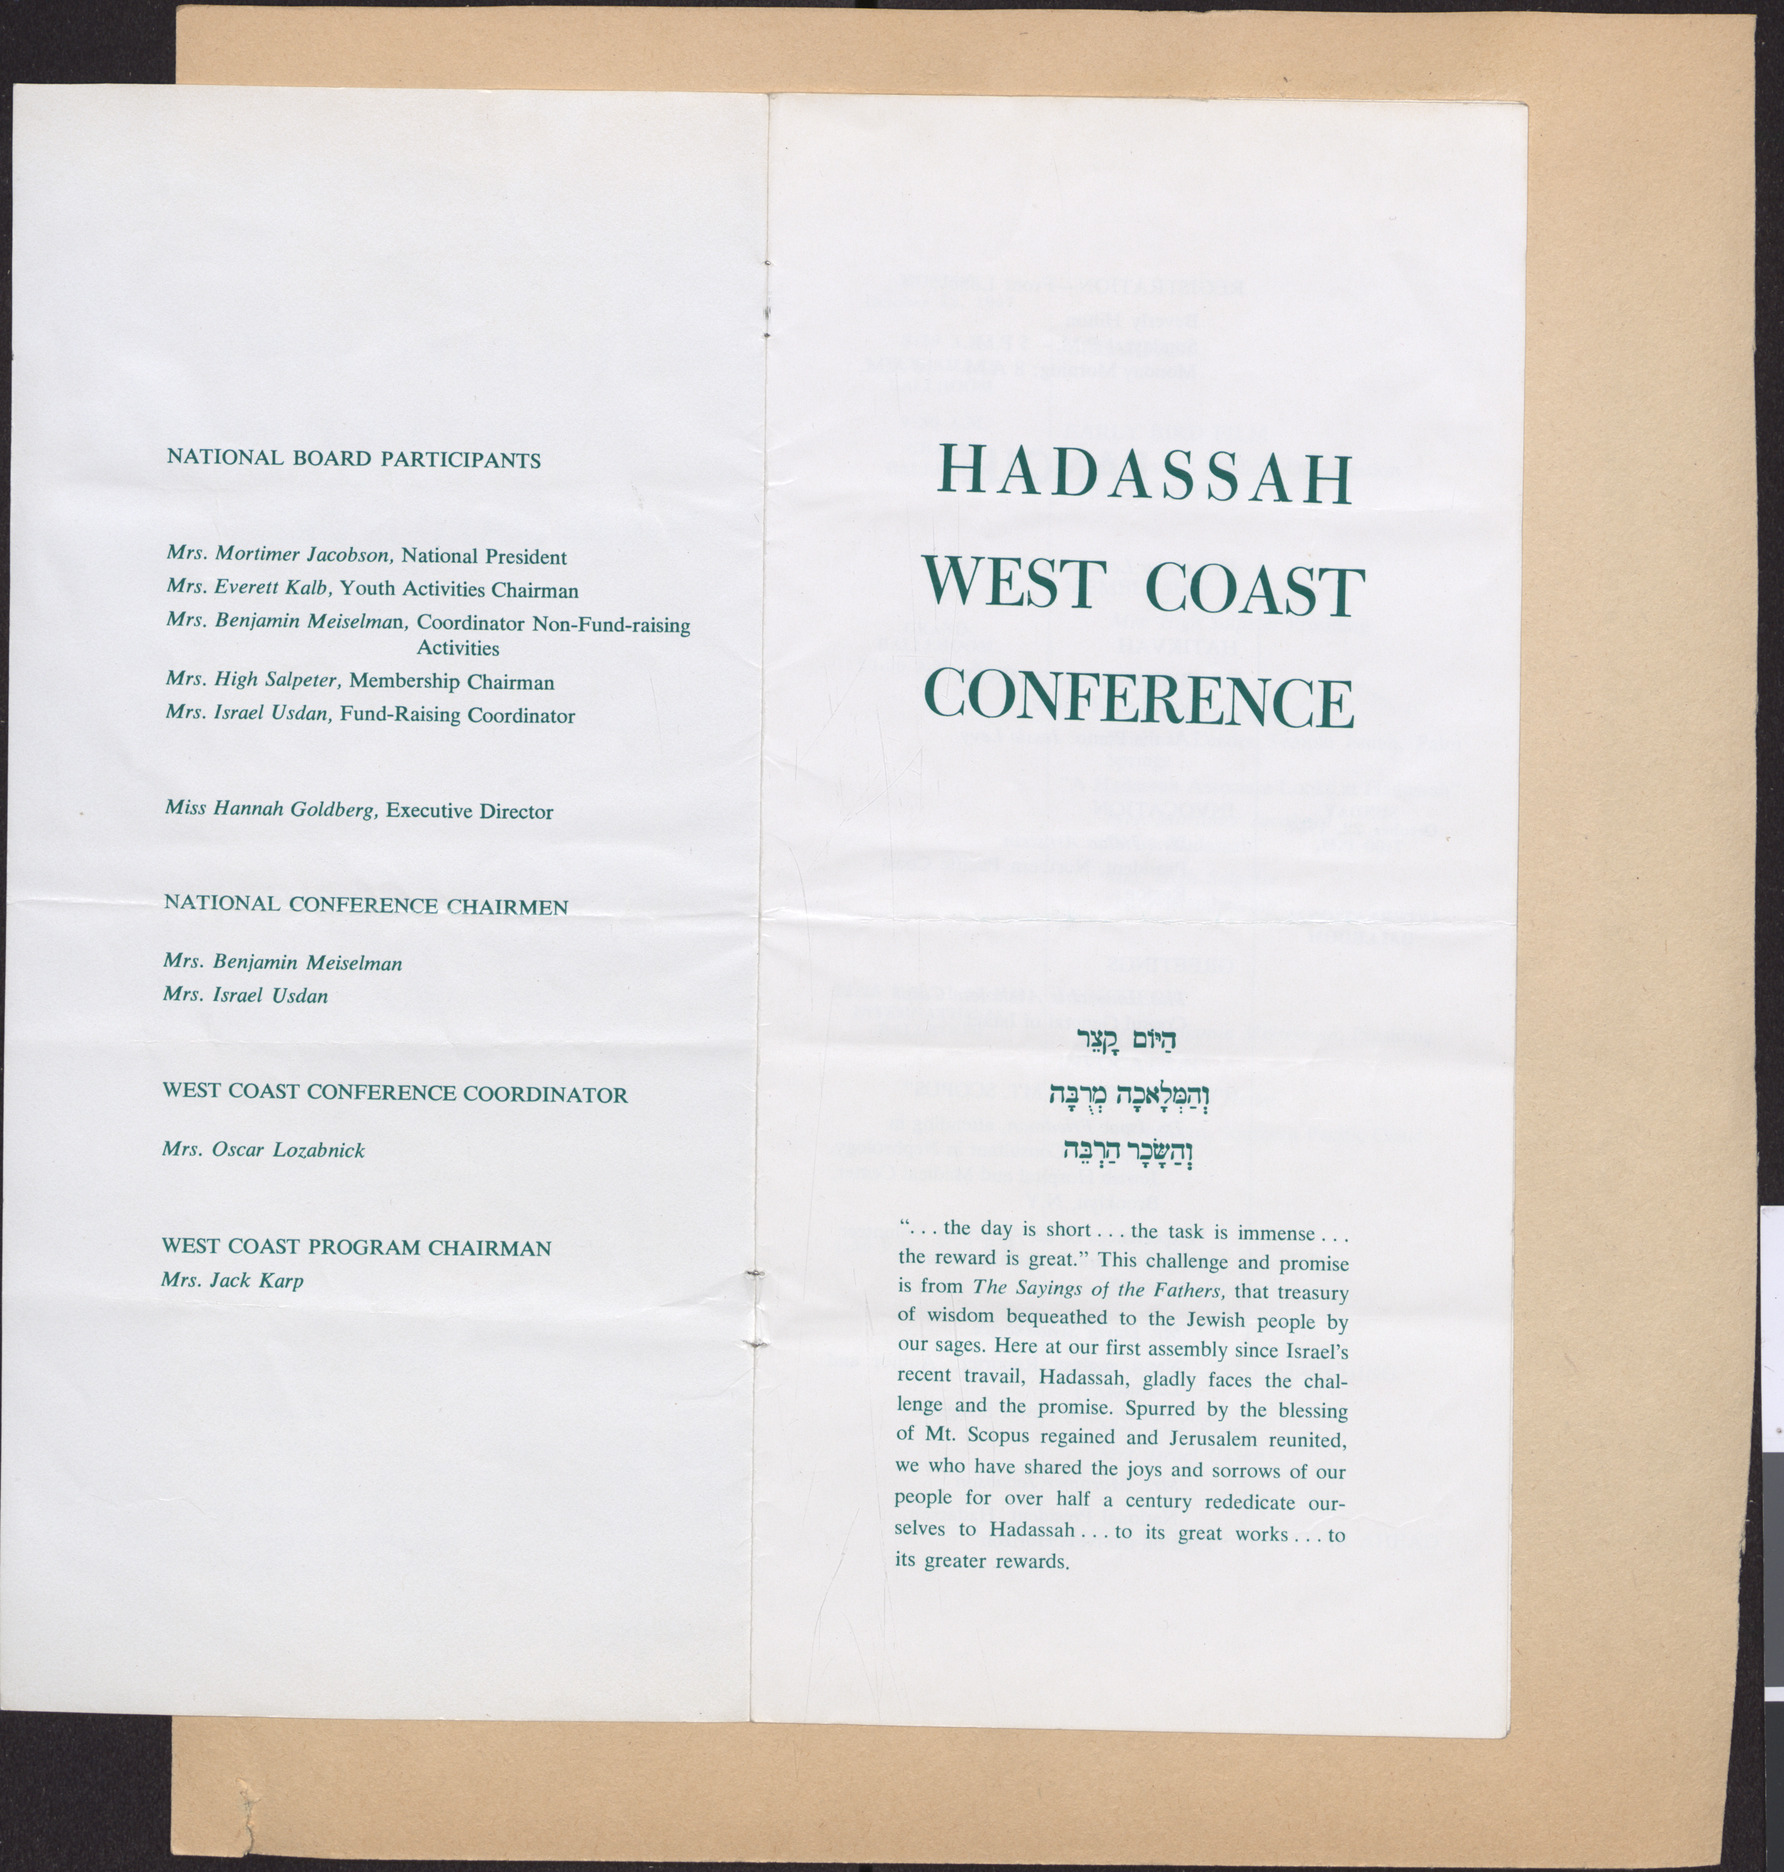 Conference program for Hadassah West Coast Conference, October 22-24, 1967, pages 1-2